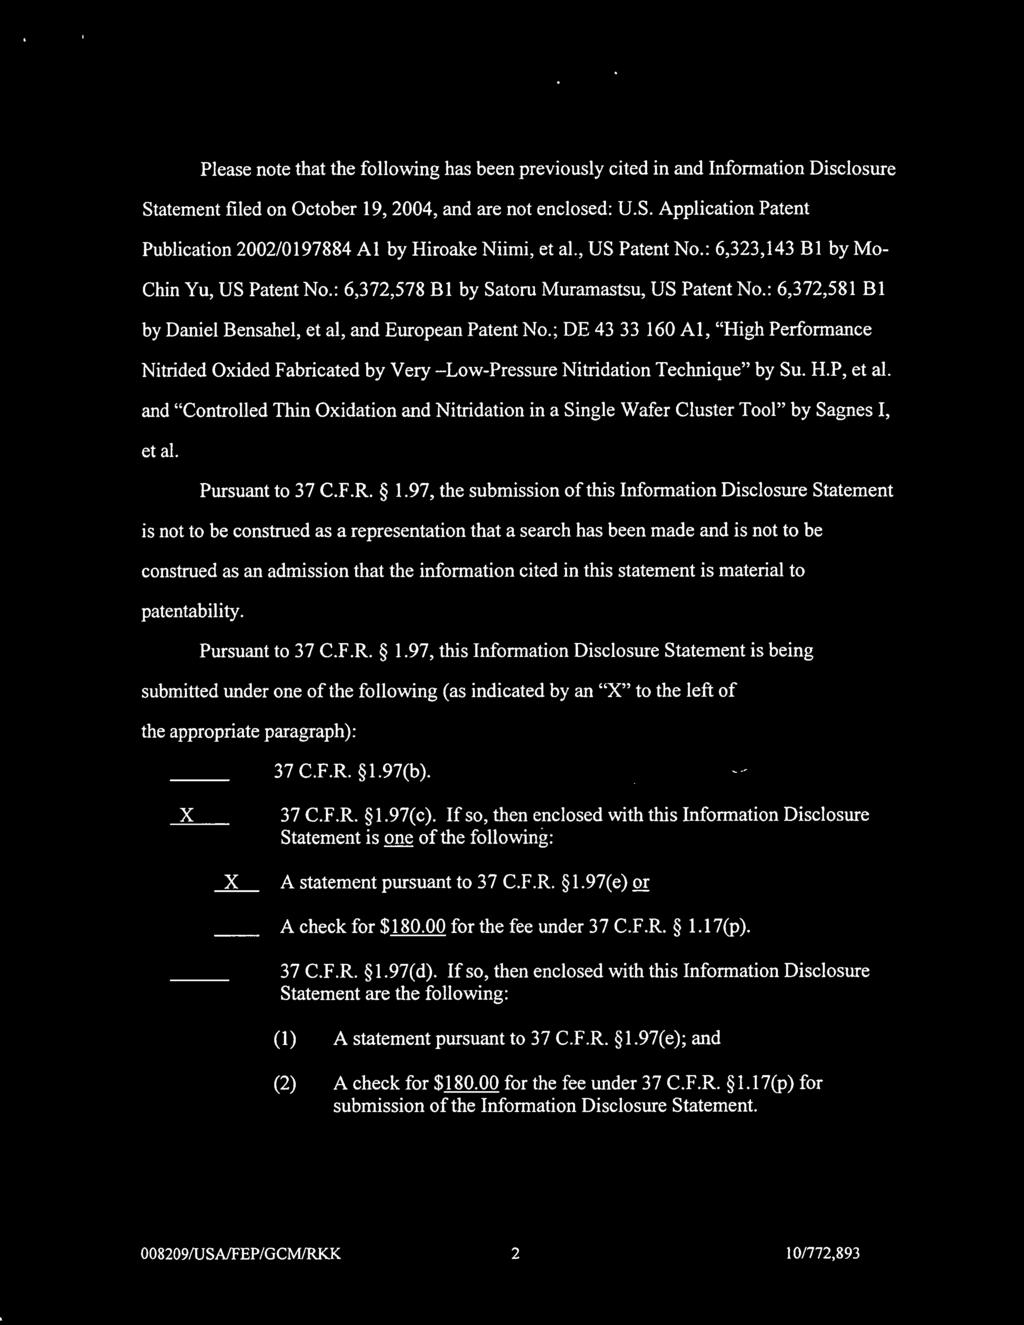 Please note that the following has been previously cited in and Information Disclosure Statement filed on October 19, 2004, and are not enclosed: U.S. Application Patent Publication 2002/0197884 Al by Hiroake Niimi, et al.